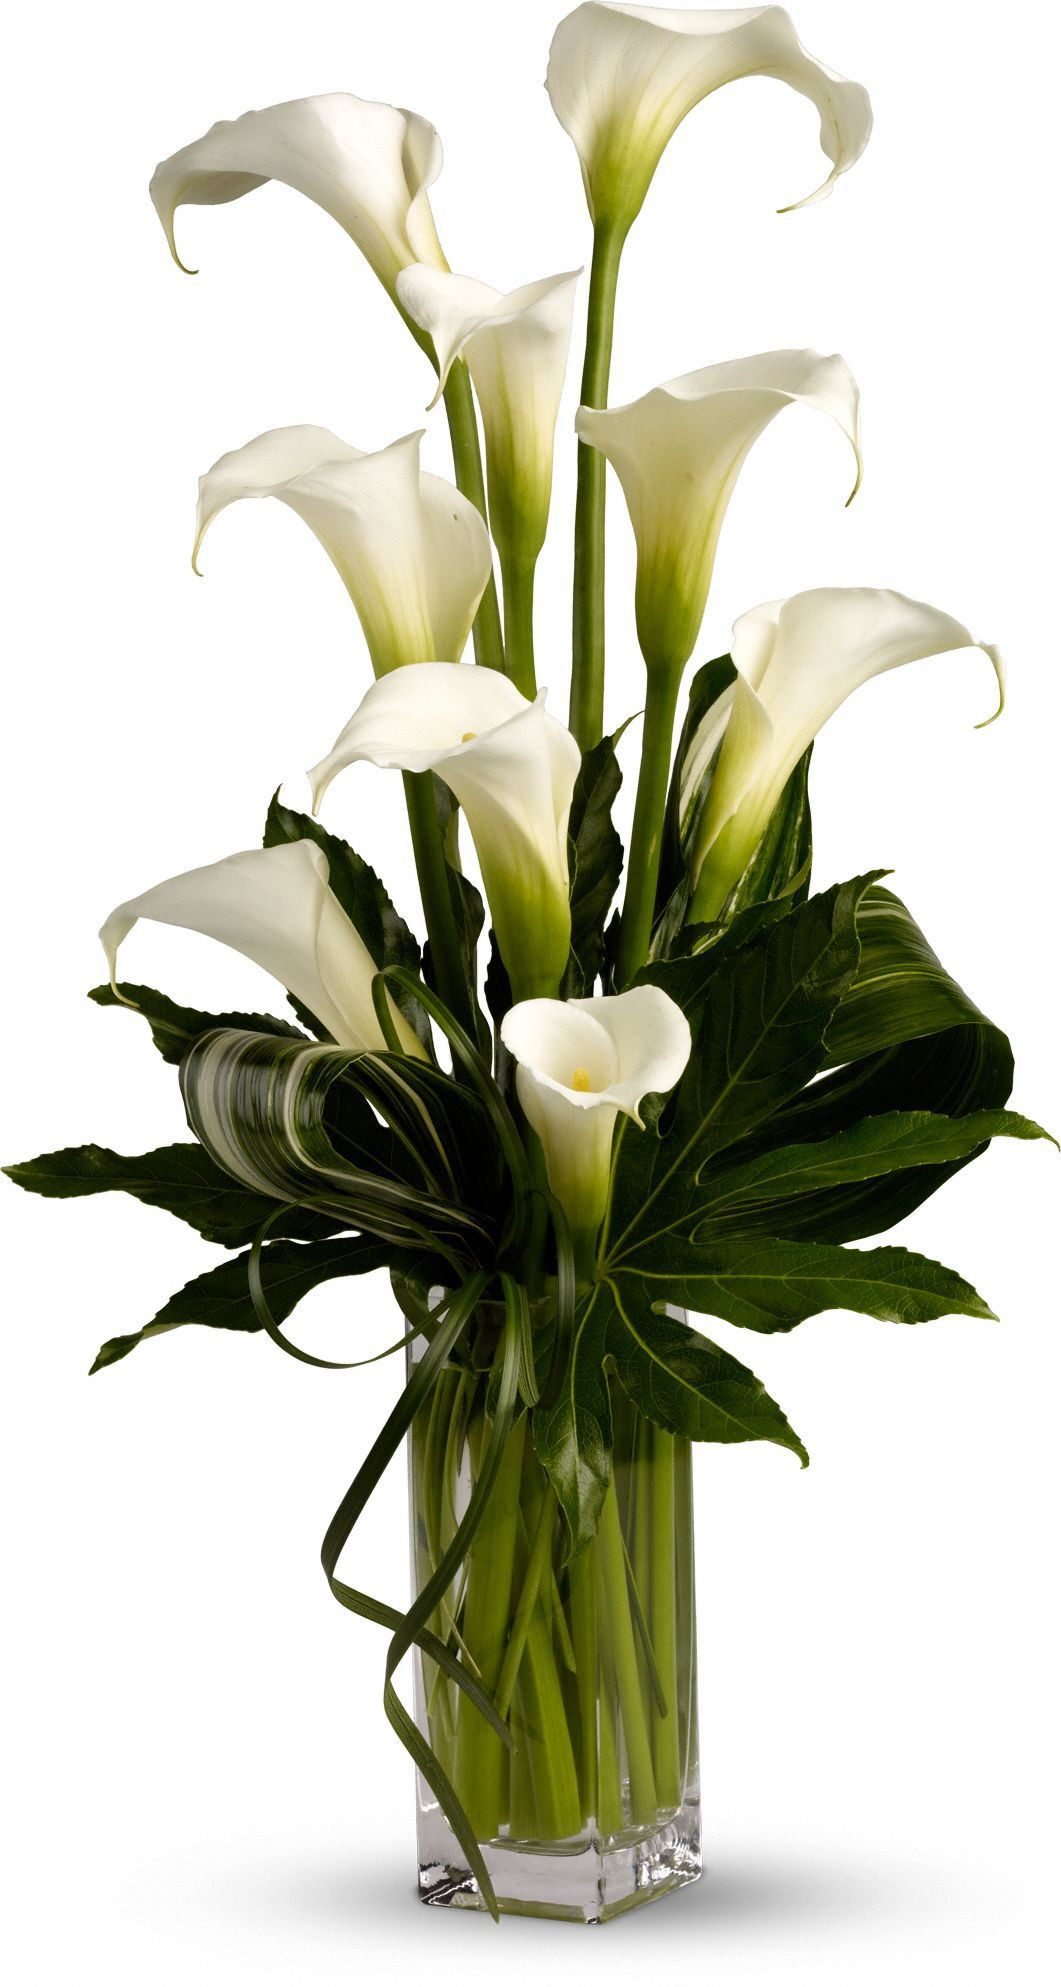 14 Fashionable Calla Lily Tall Vase 2024 free download calla lily tall vase of notice leaves my fair lady maybe for food table in large cylinder regarding my fair lady maybe for food table in large cylinder vase